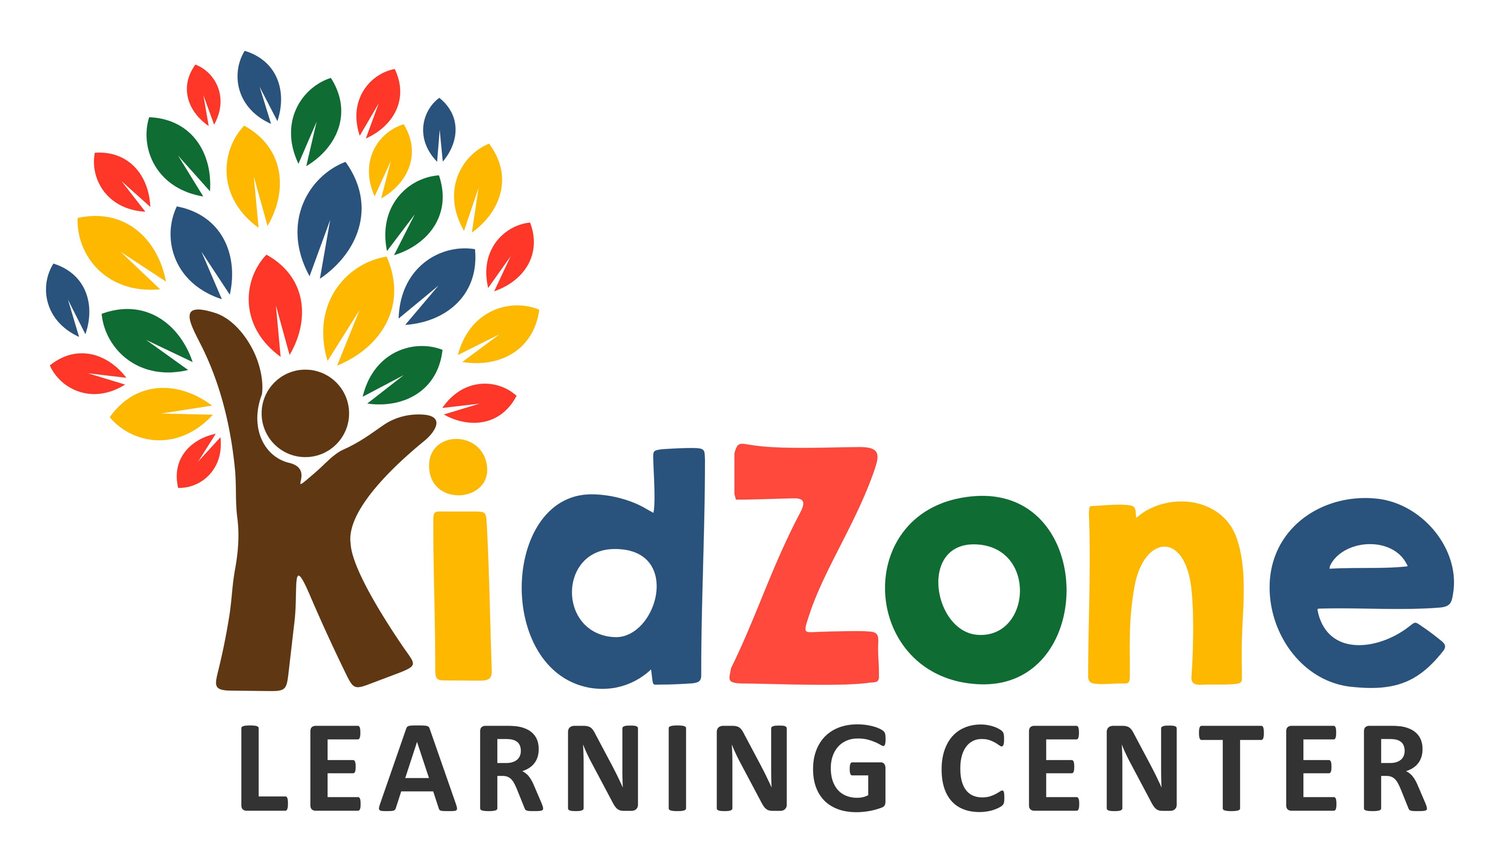 KidZone Learning Center, we are more than just a daycare